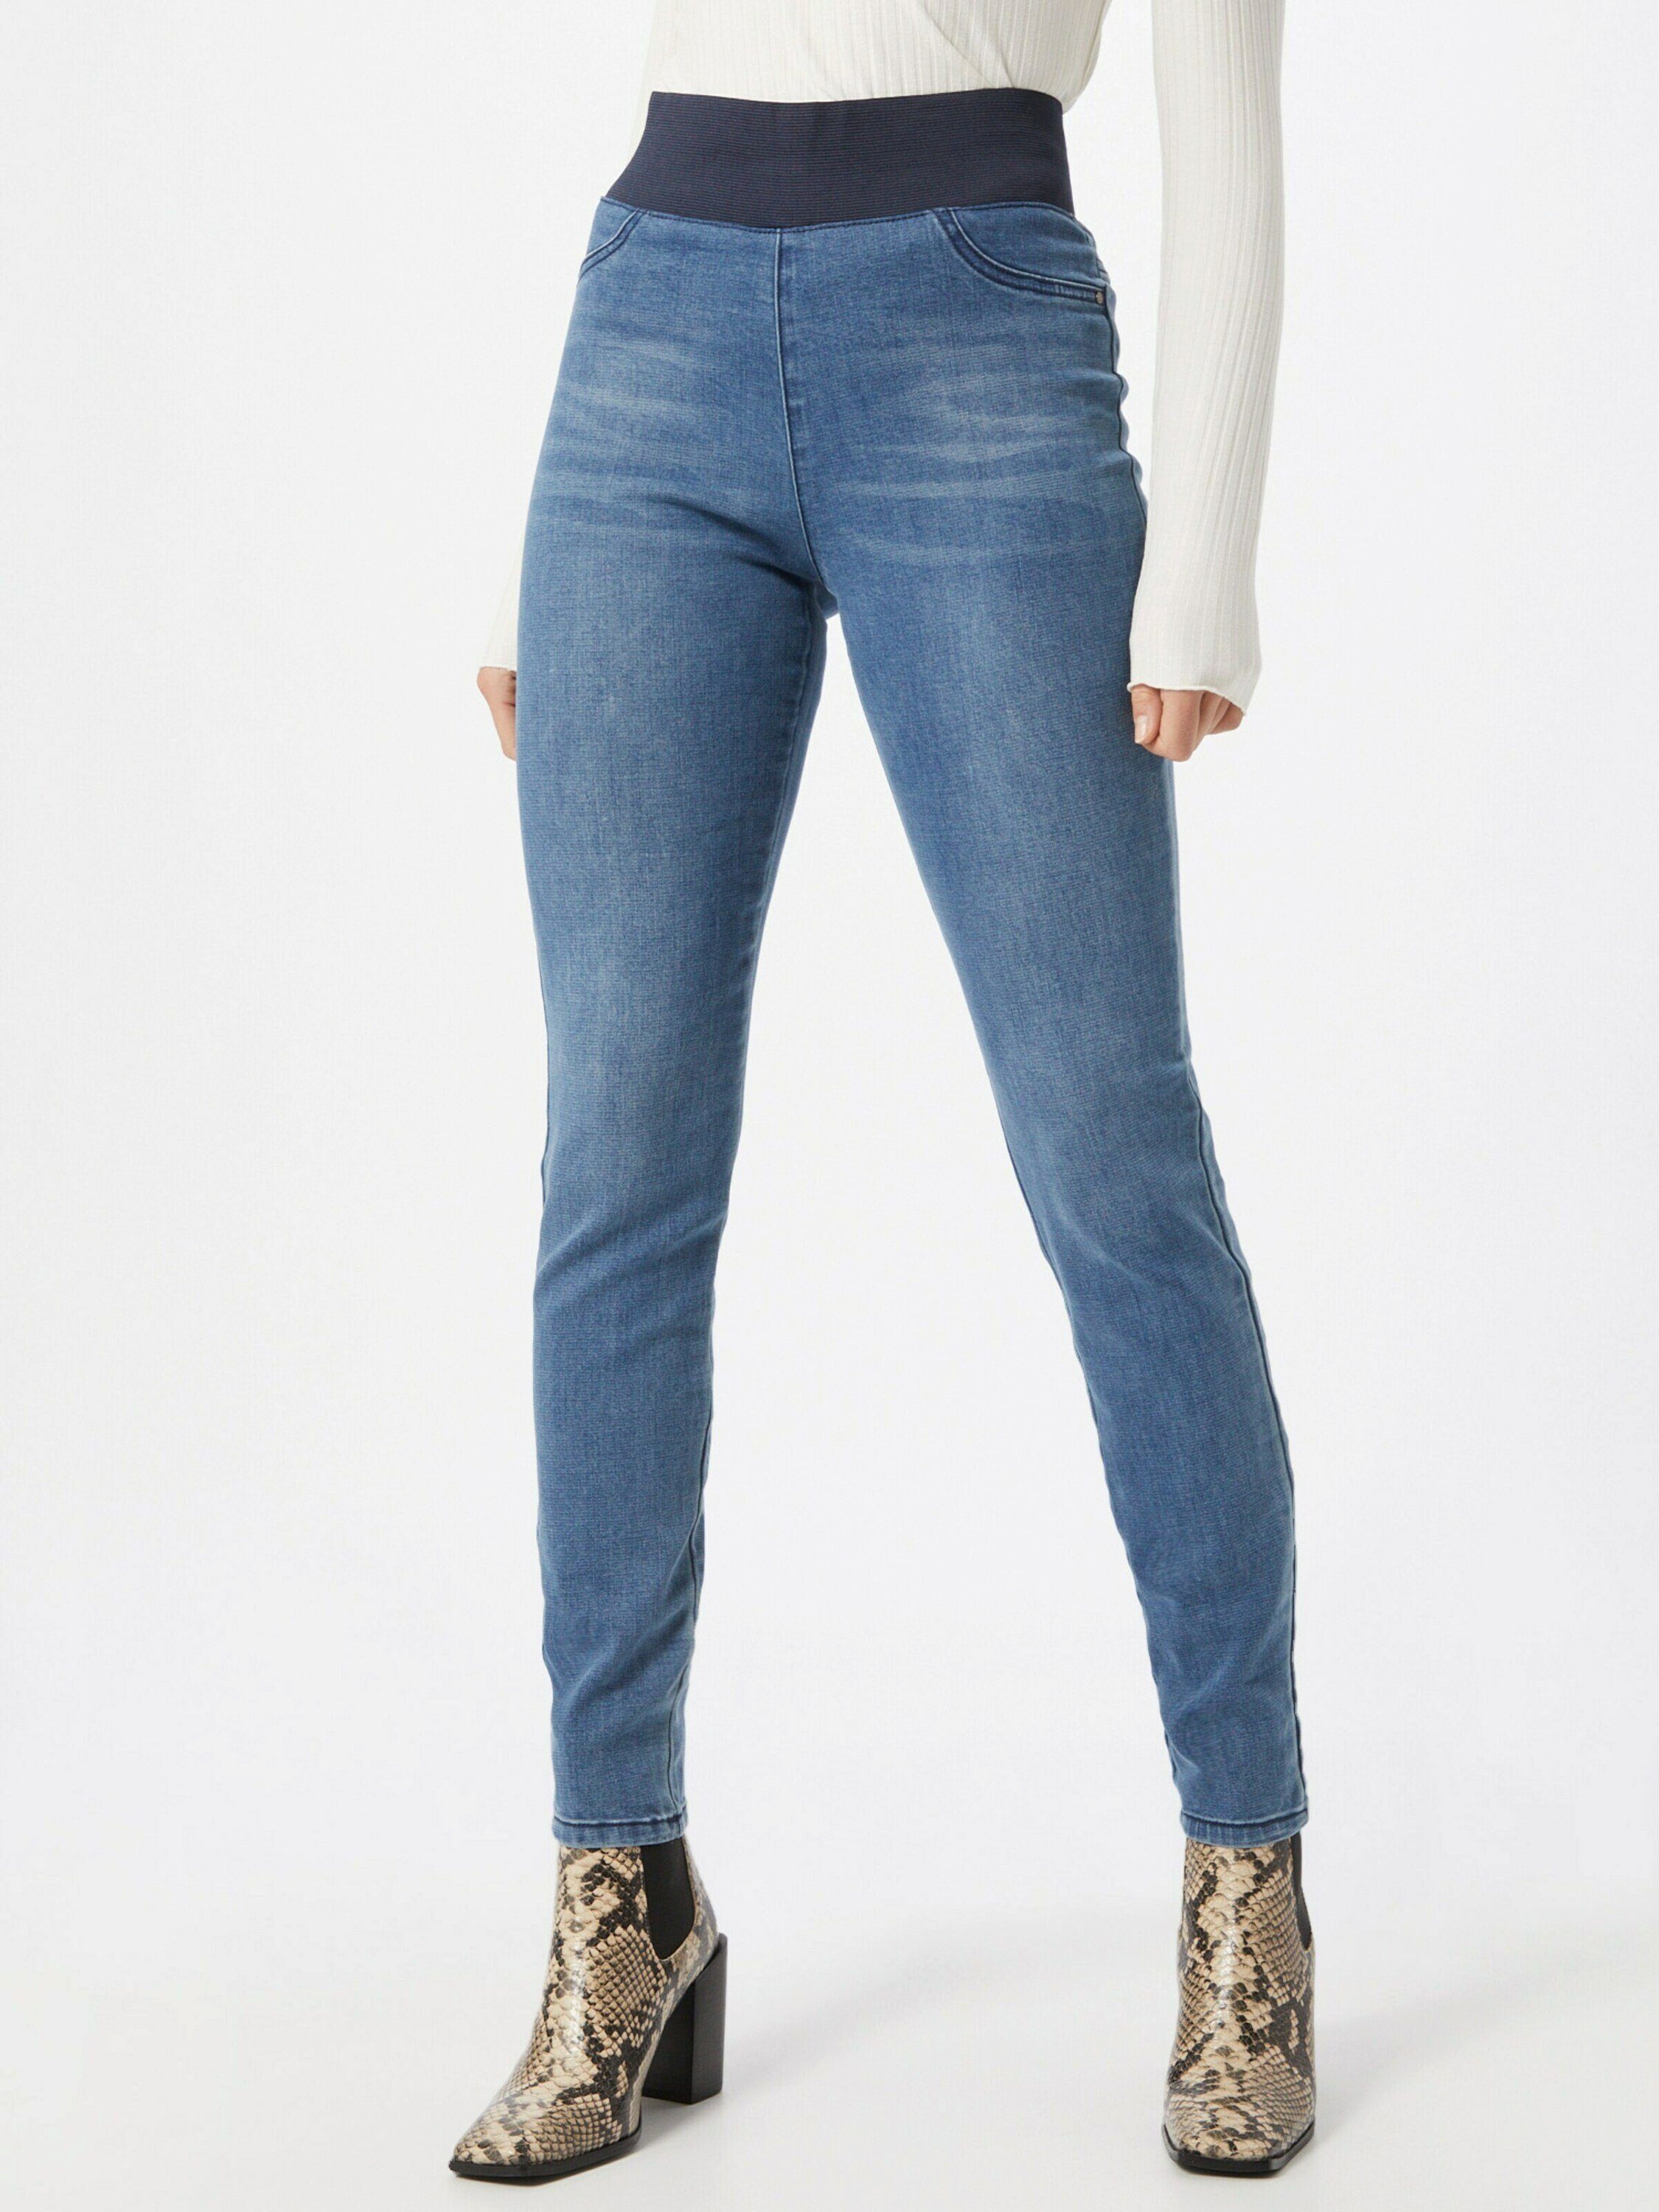 Plain/ohne (1-tlg) FREEQUENT Detail, Details Skinny-fit-Jeans Weiteres Shantal